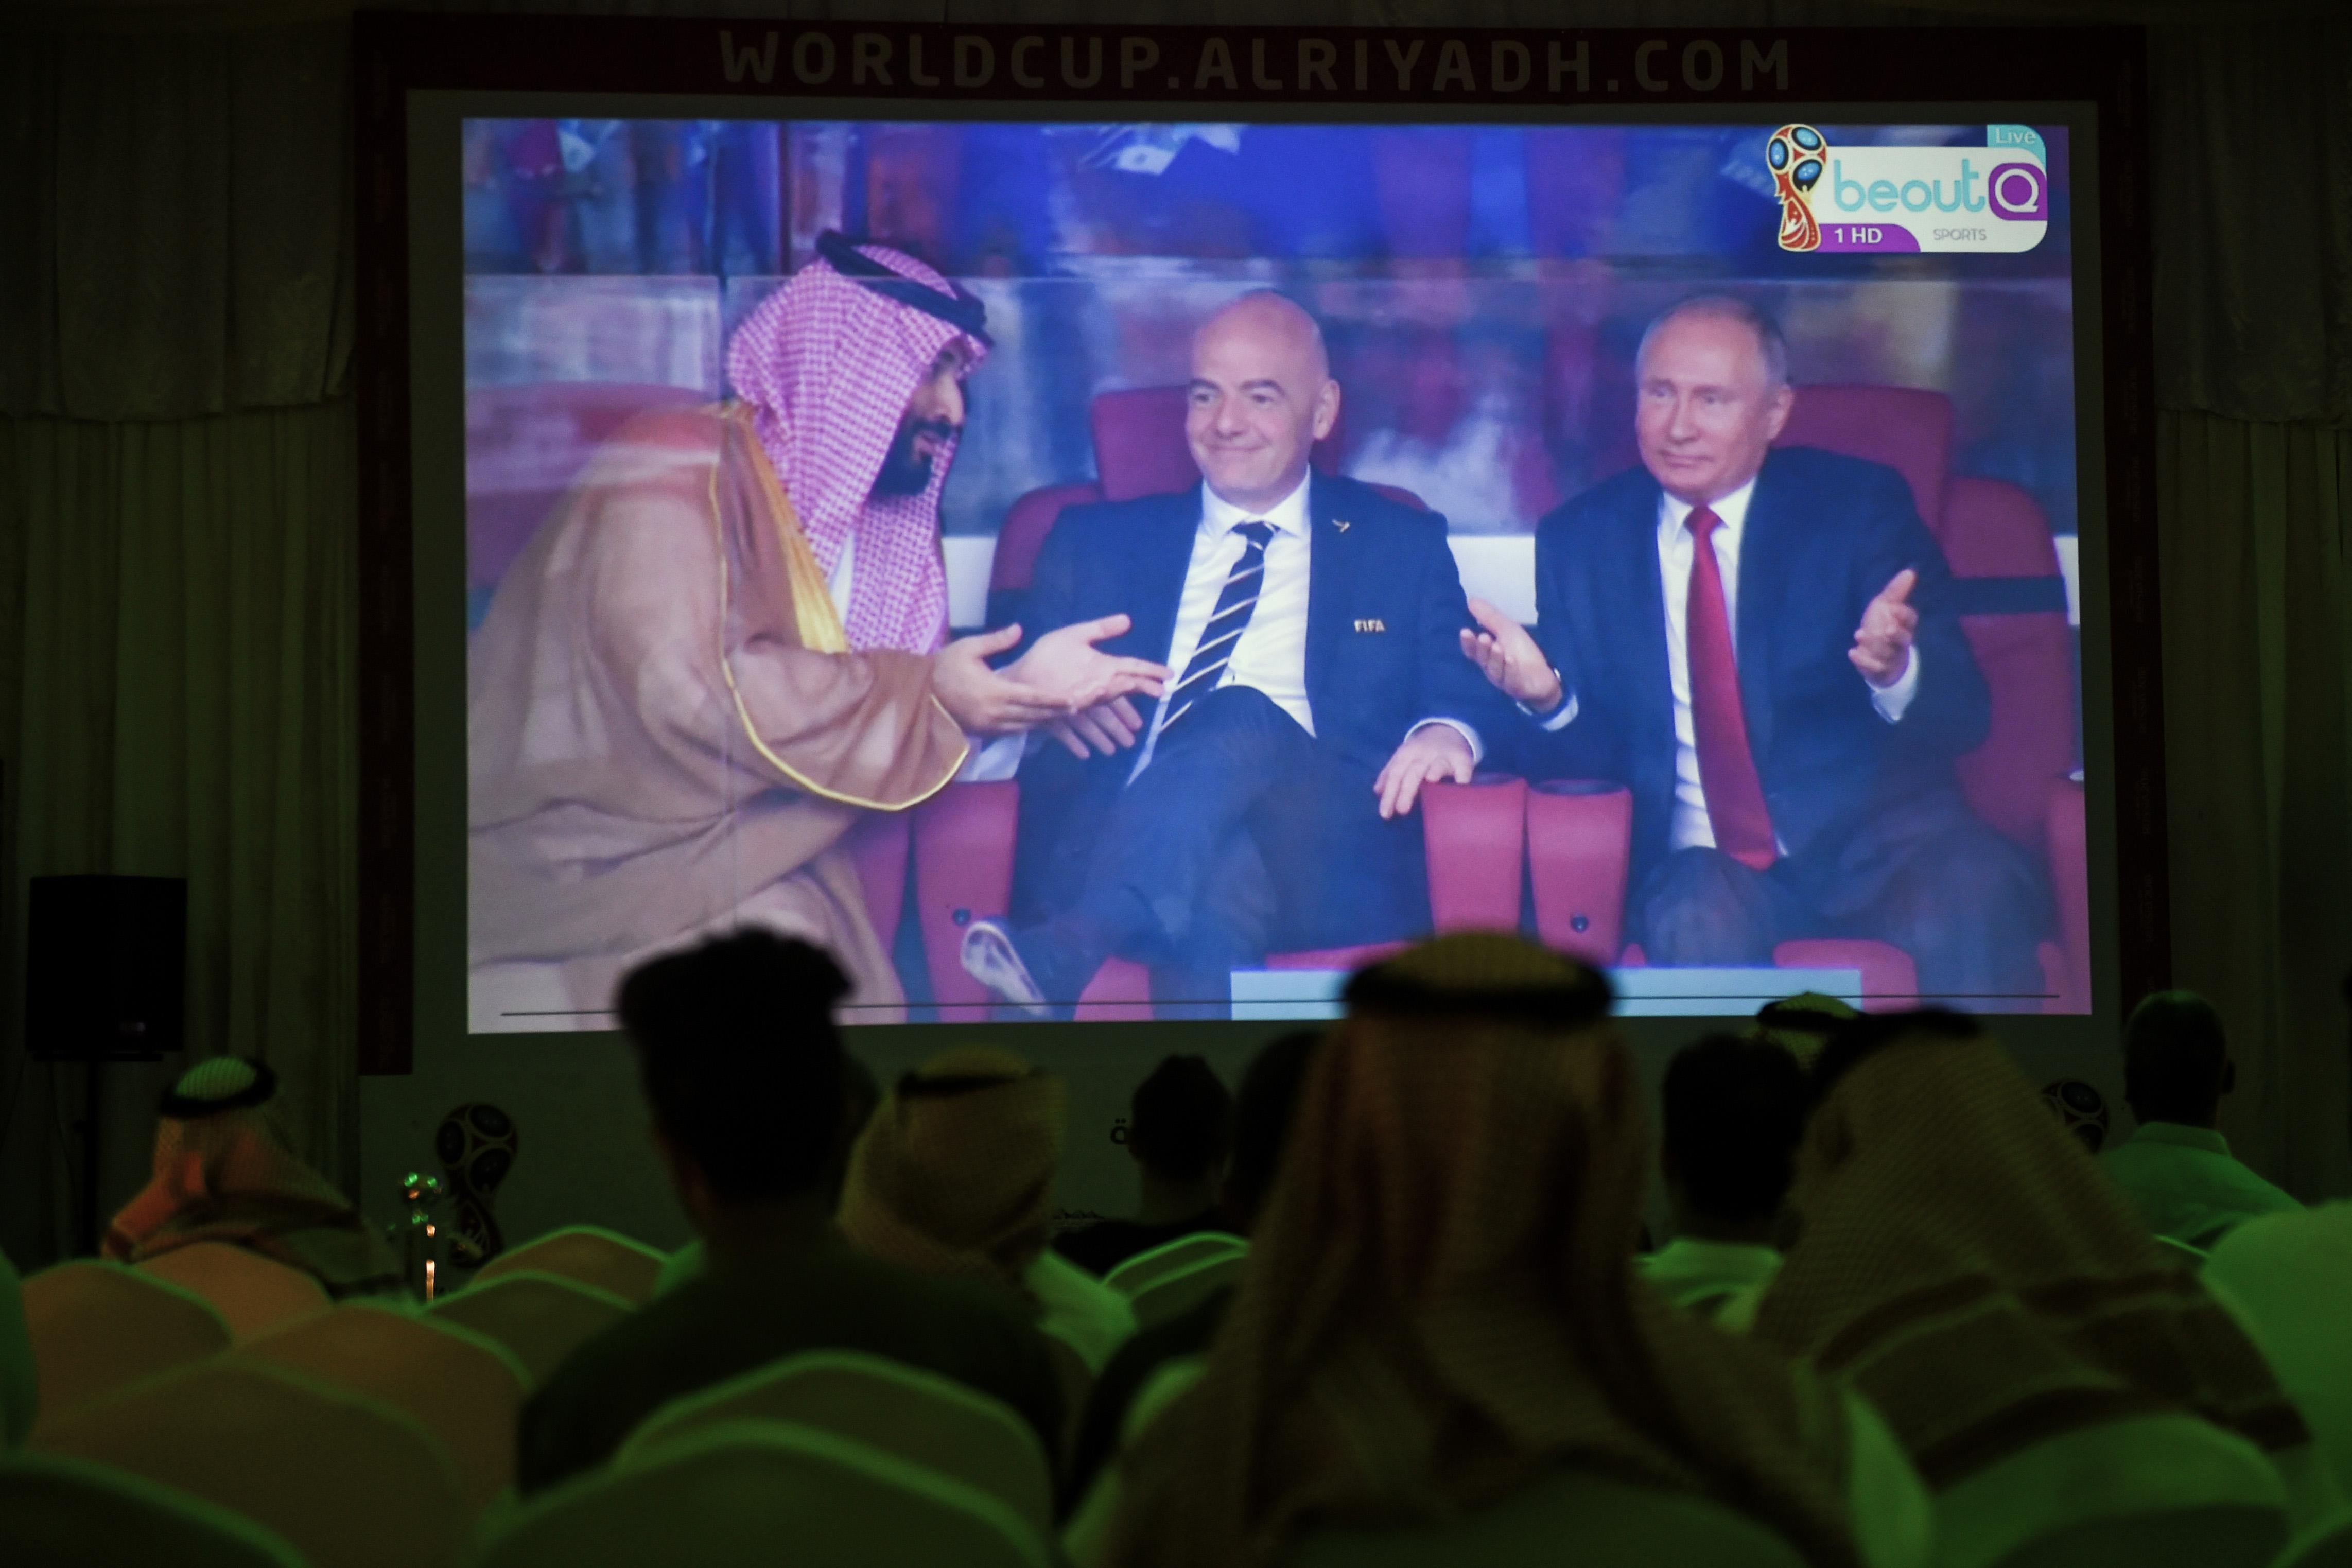 A picture taken on June 14, 2018 in a Saudi football fan tent in the capital Riyadh shows a projector showing the Russia 2018 World Cup Group A football match between Russia and Saudi Arabia, with a clip of Saudi Crown Prince Mohammed bin Salman (L) gesturing as he sits next to FIFA President Gianni Infantino (C) and Russian President Vladimir Putin (R). (Photo by Fayez Nureldine / AFP)        (Photo credit should read FAYEZ NURELDINE/AFP/Getty Images)